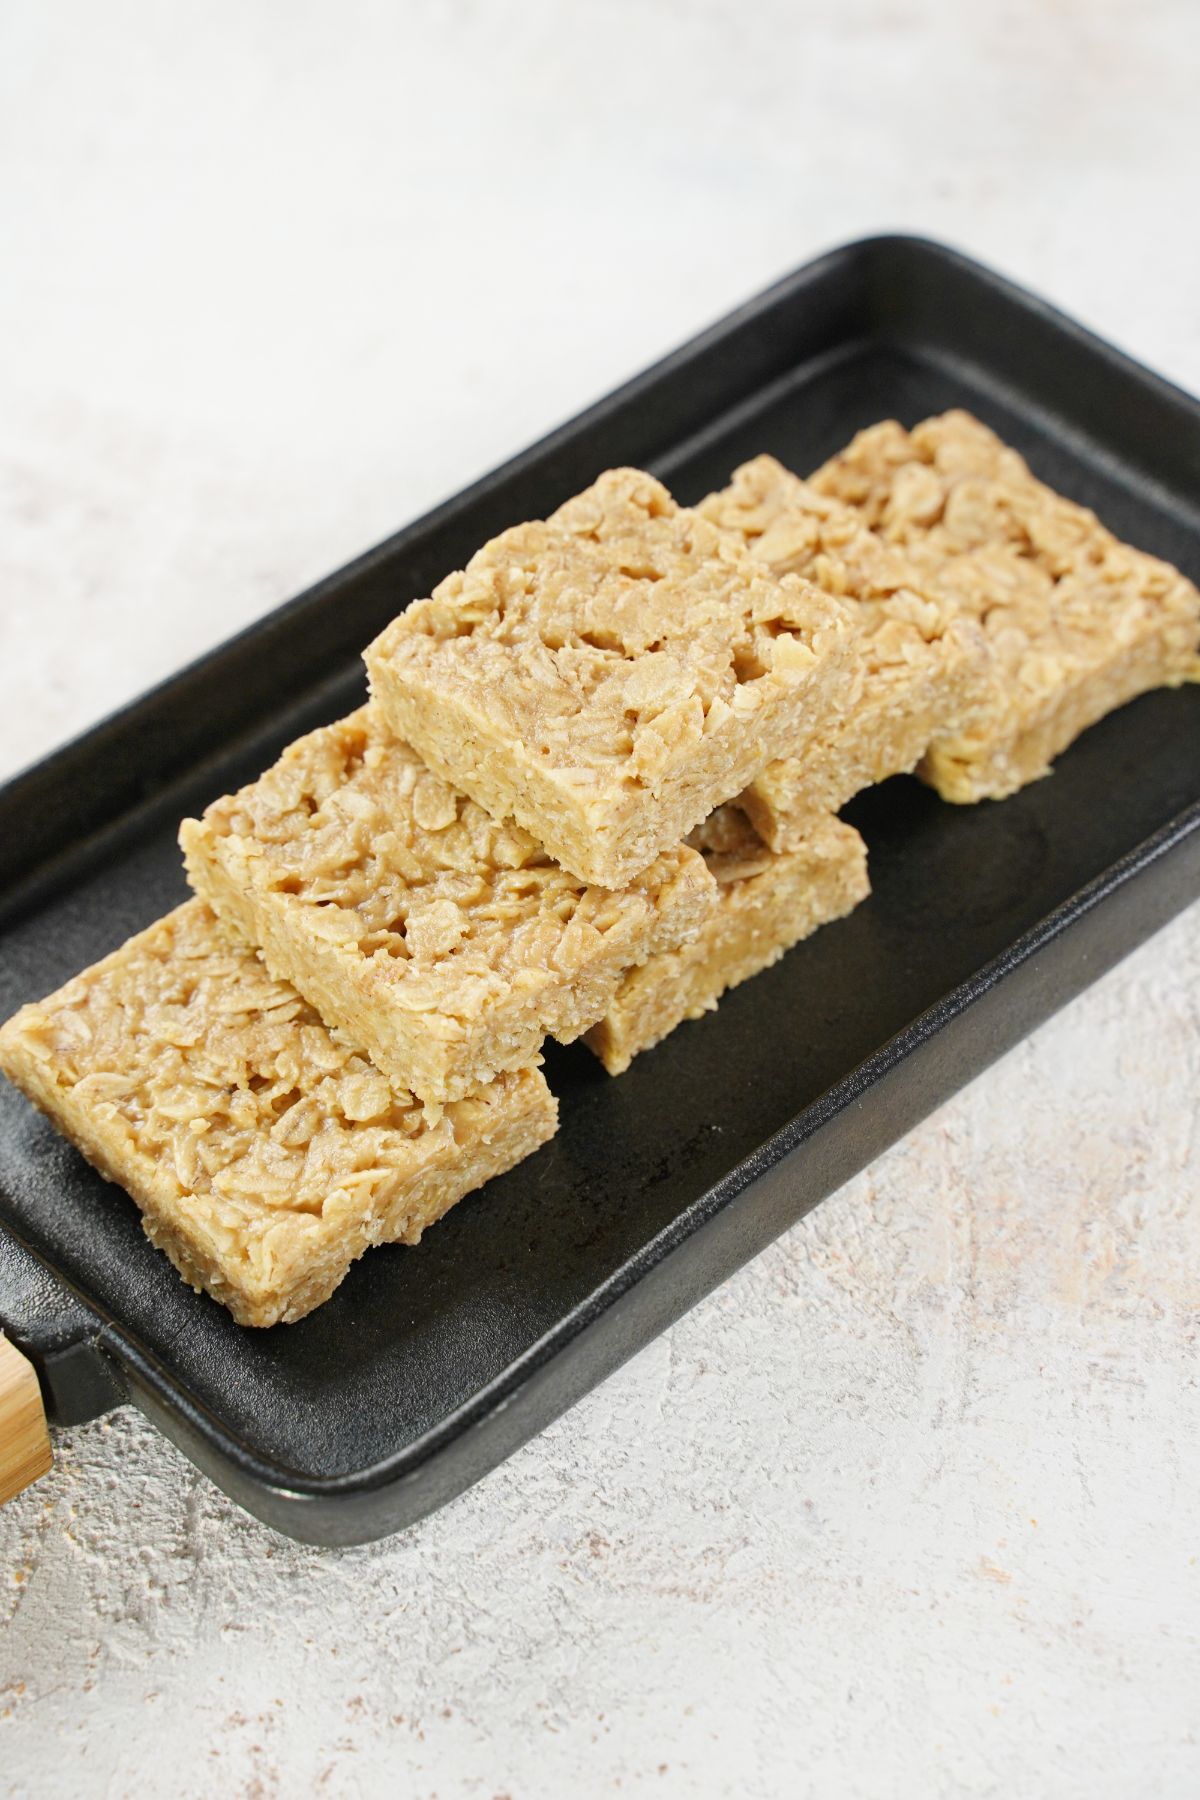 Peanut Butter Oat Bars served in a black tray